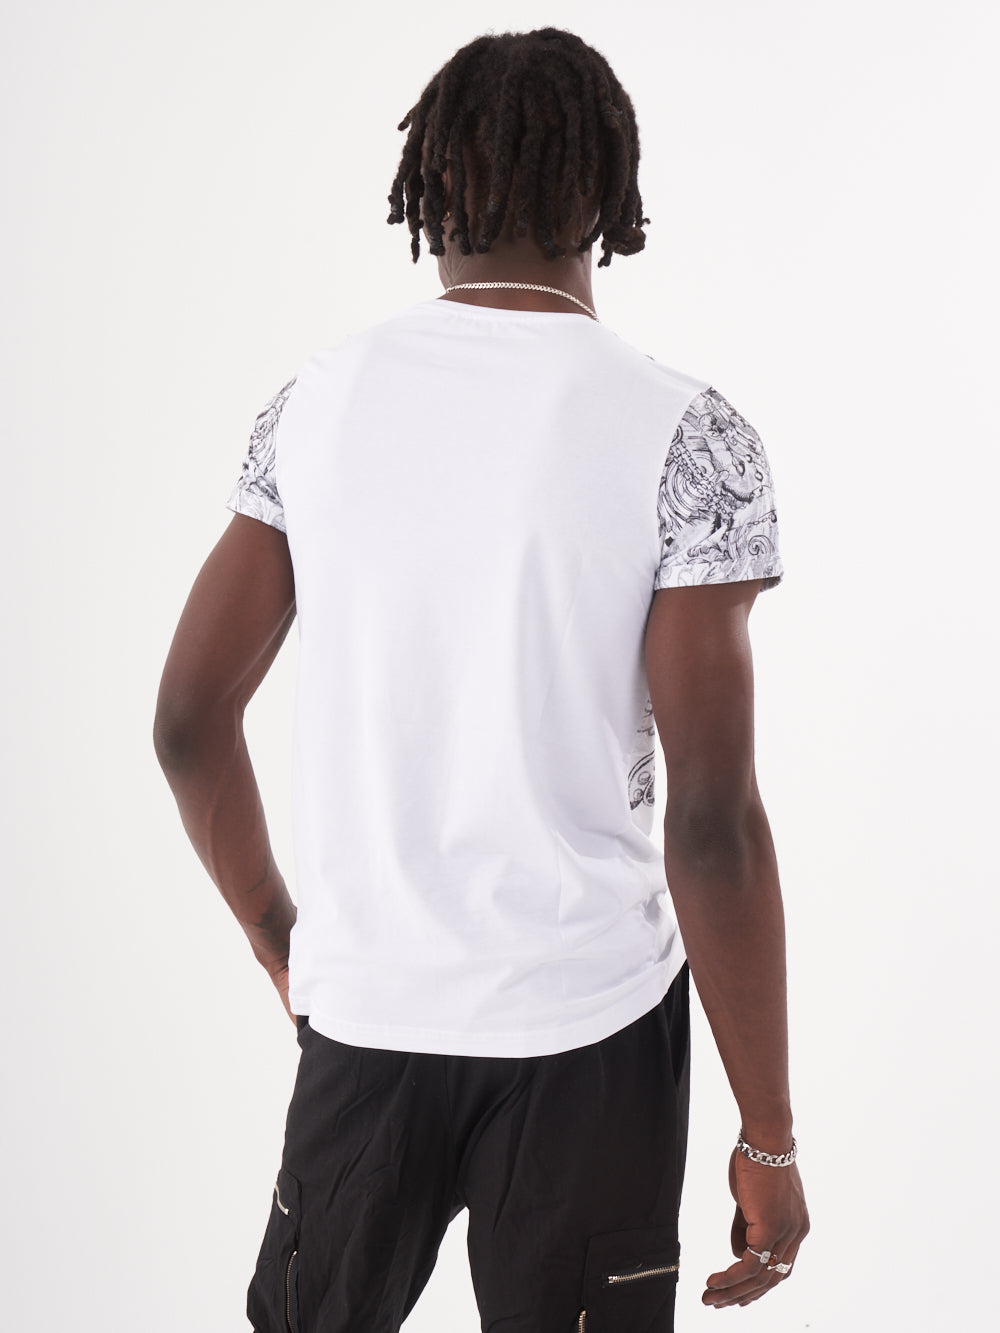 A man with an edgy style wearing a gothic-inspired TRINITY T-SHIRT | WHITE and black shorts.